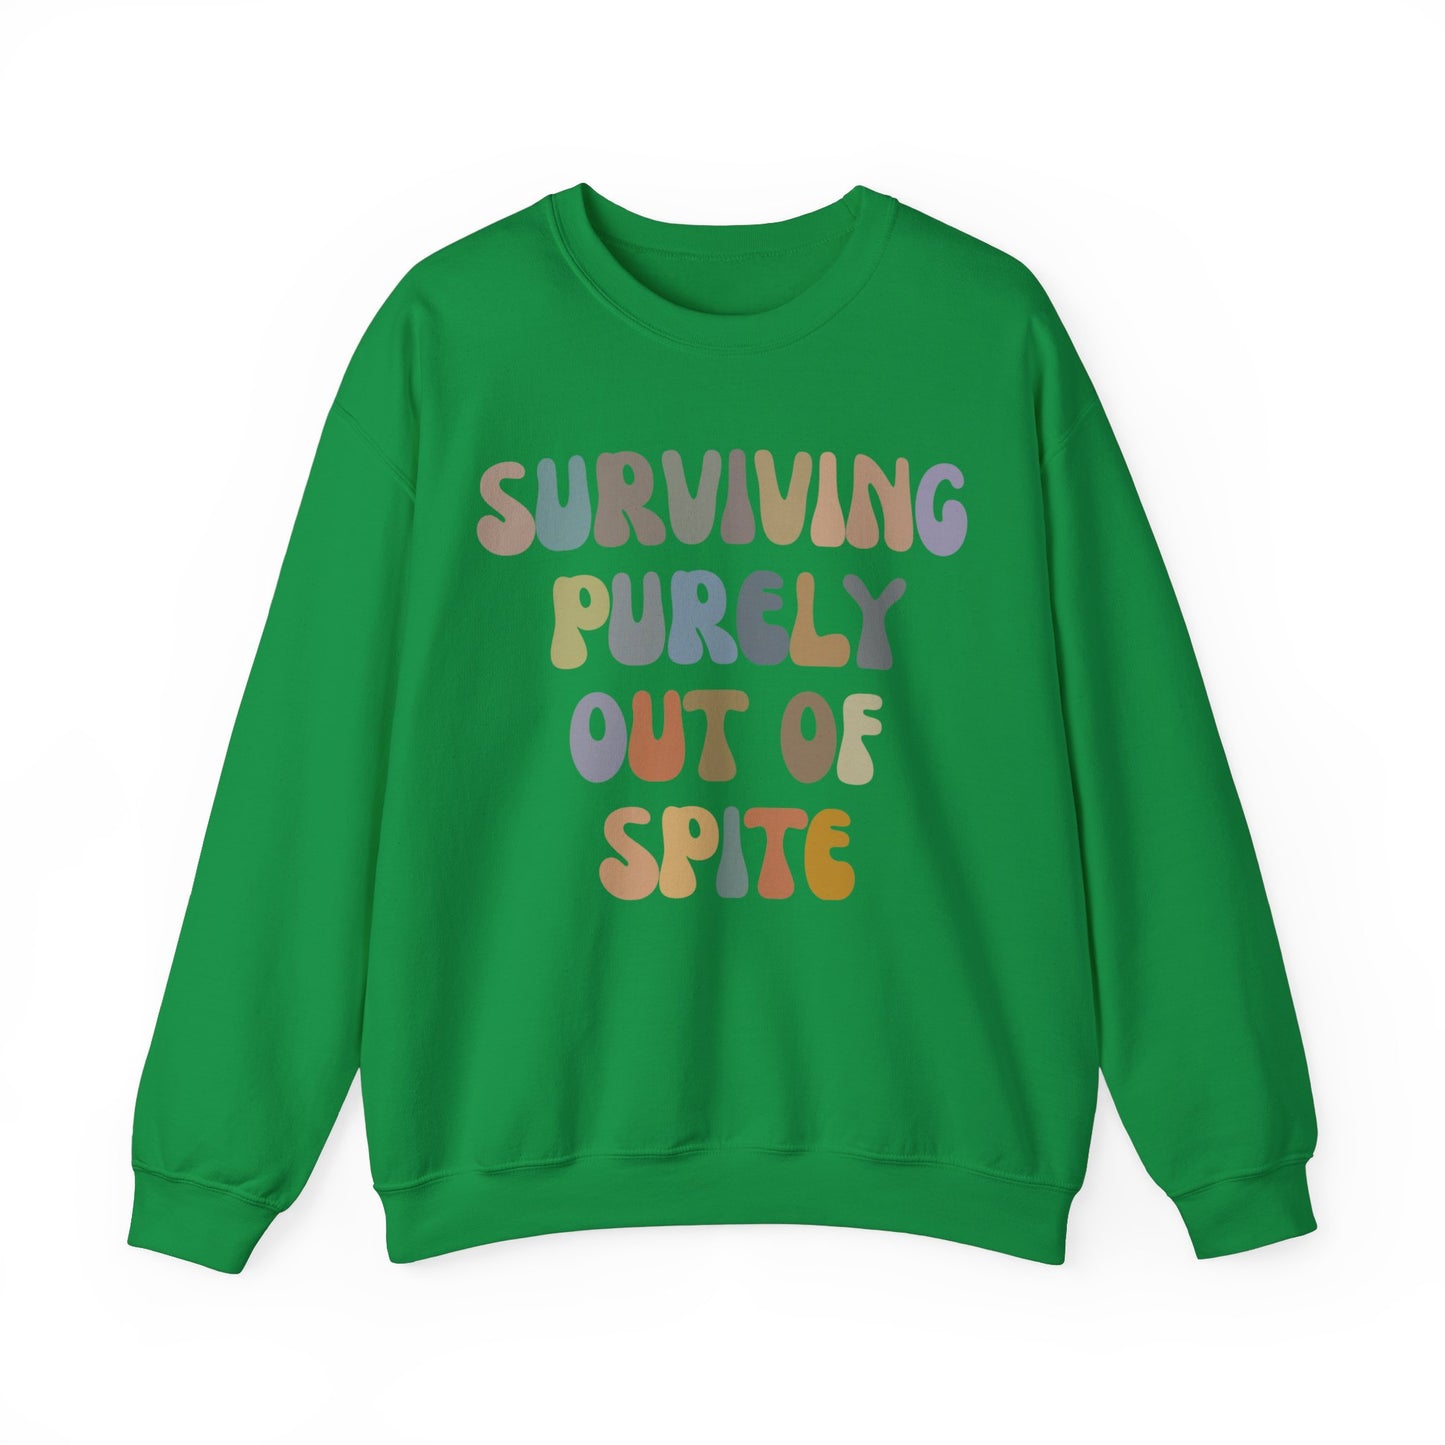 Surviving Purely Out of Spite Sweatshirt, Mental Health, Cancer Survivor, Survivor Sweatshirt, Strong Empowered Women, Iron Lady, S1406